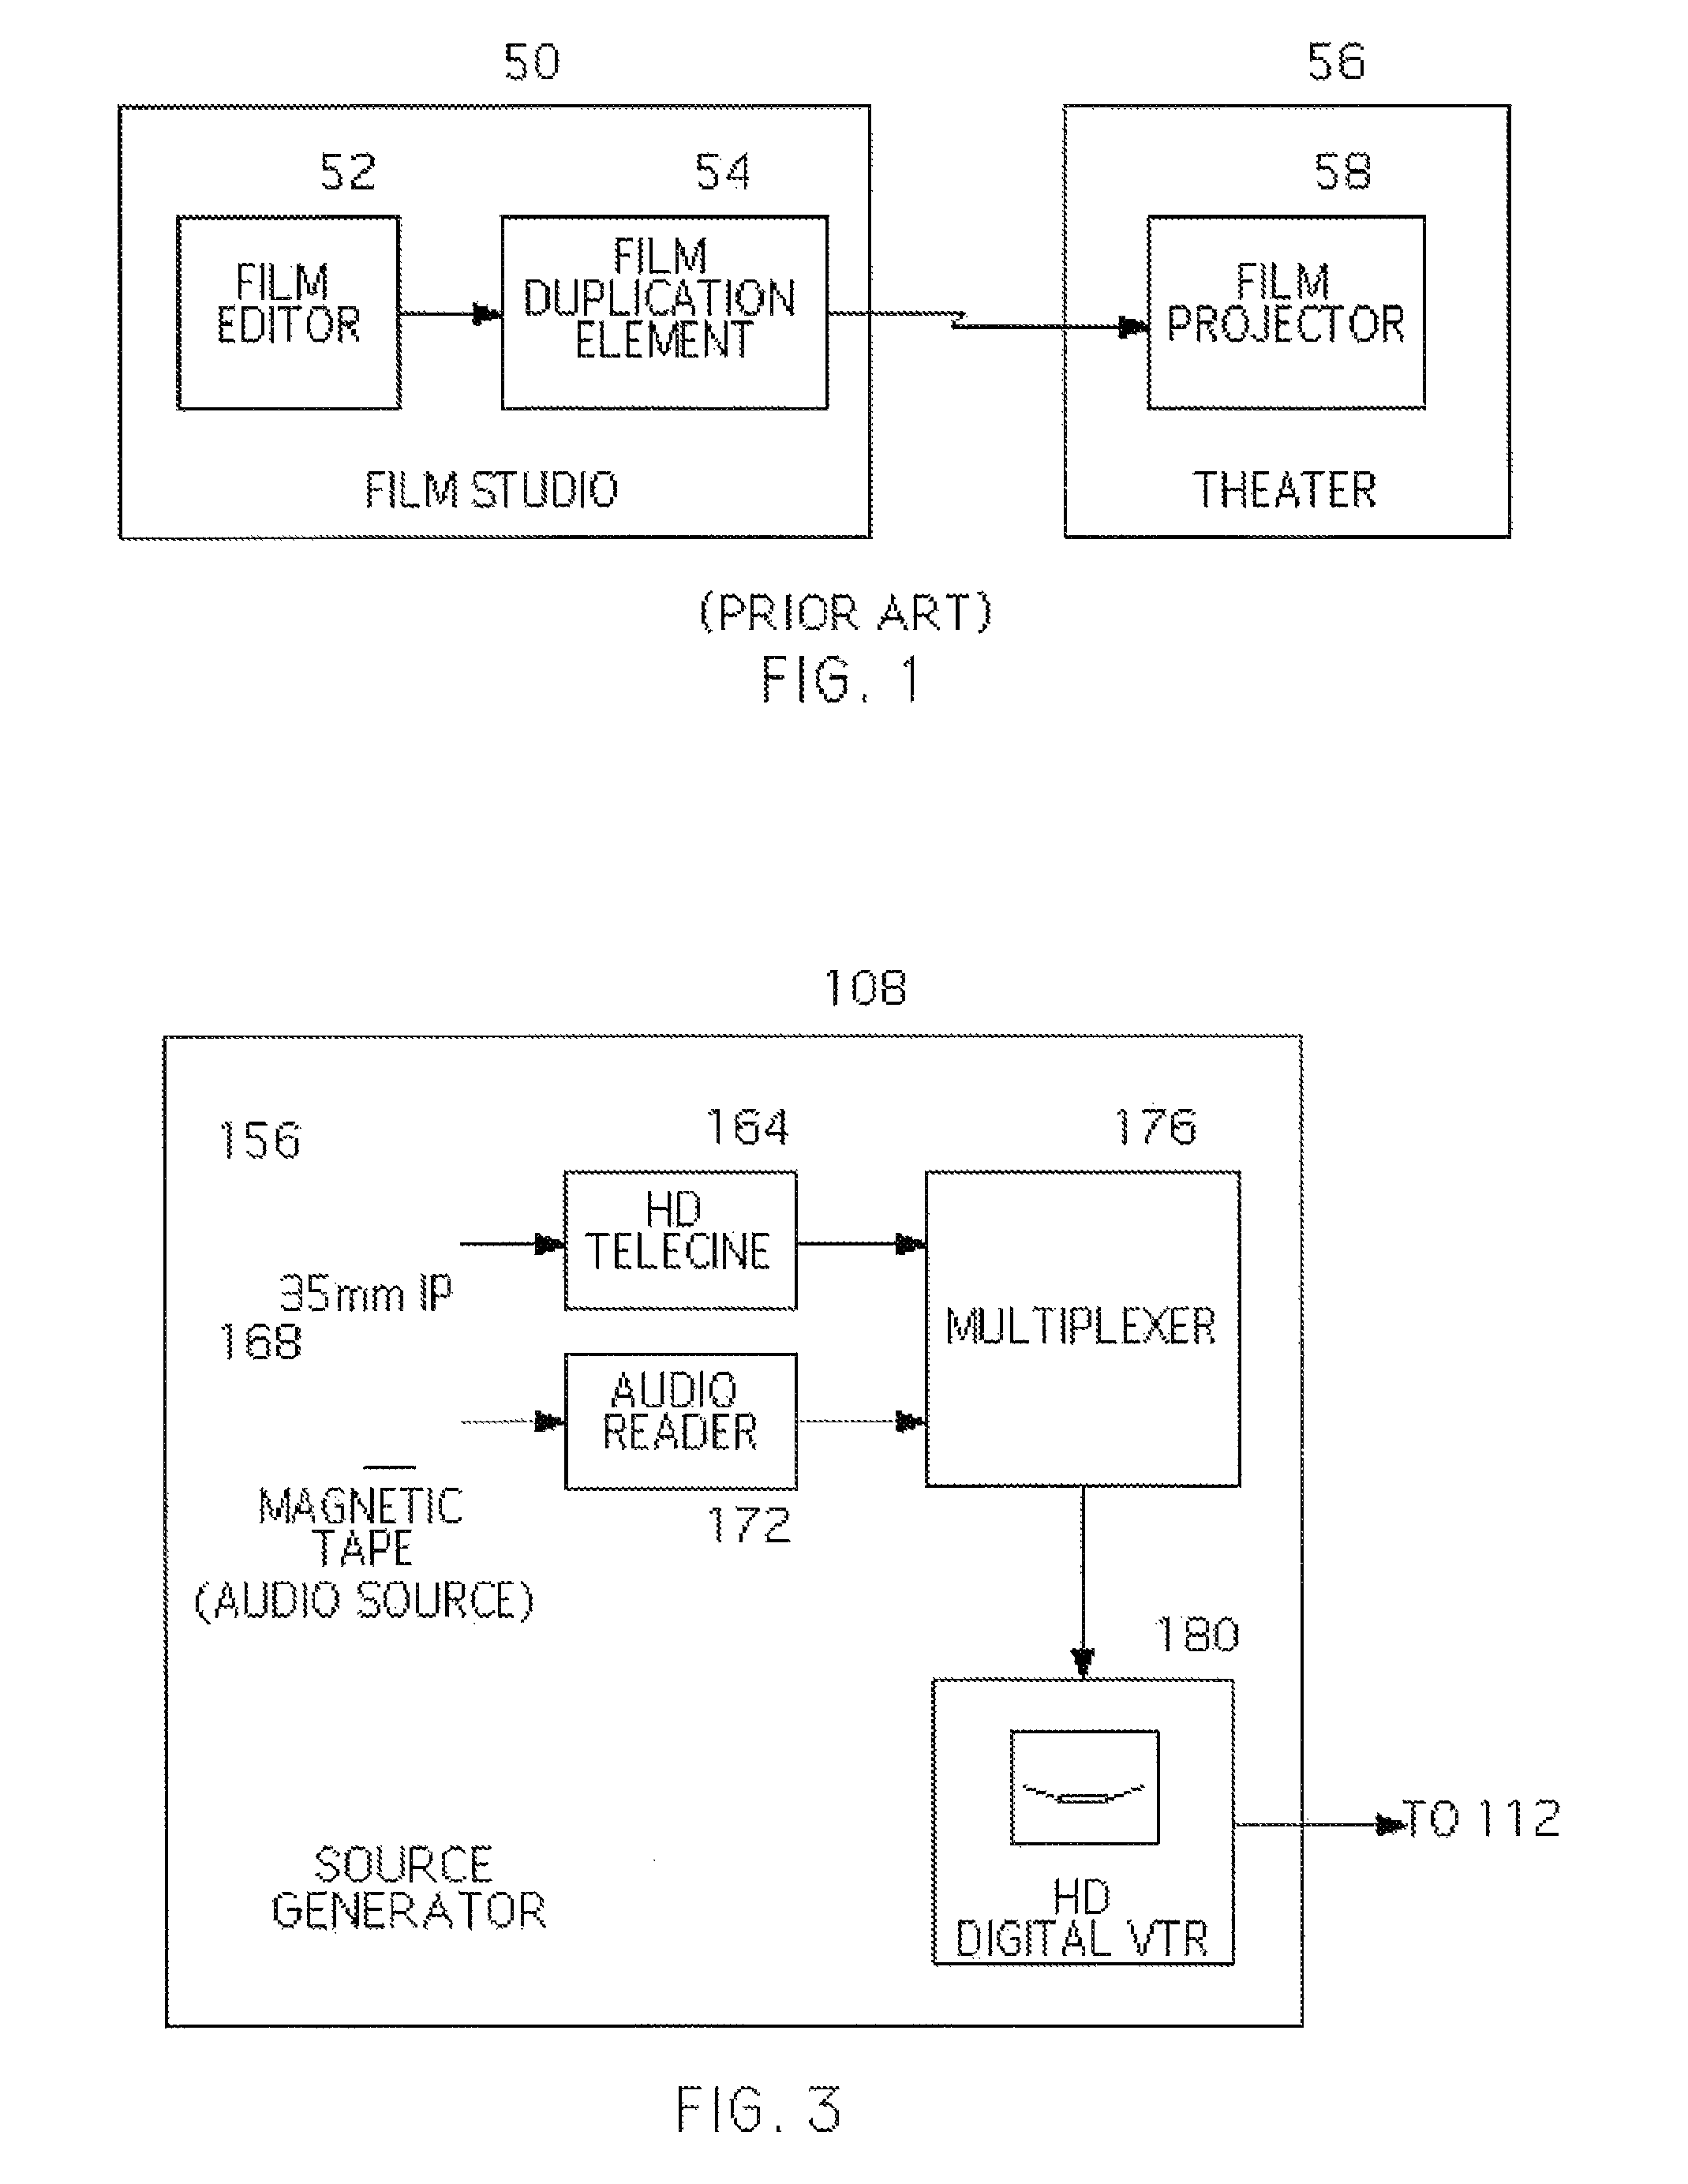 Apparatus and method for decoding digital image and audio signals